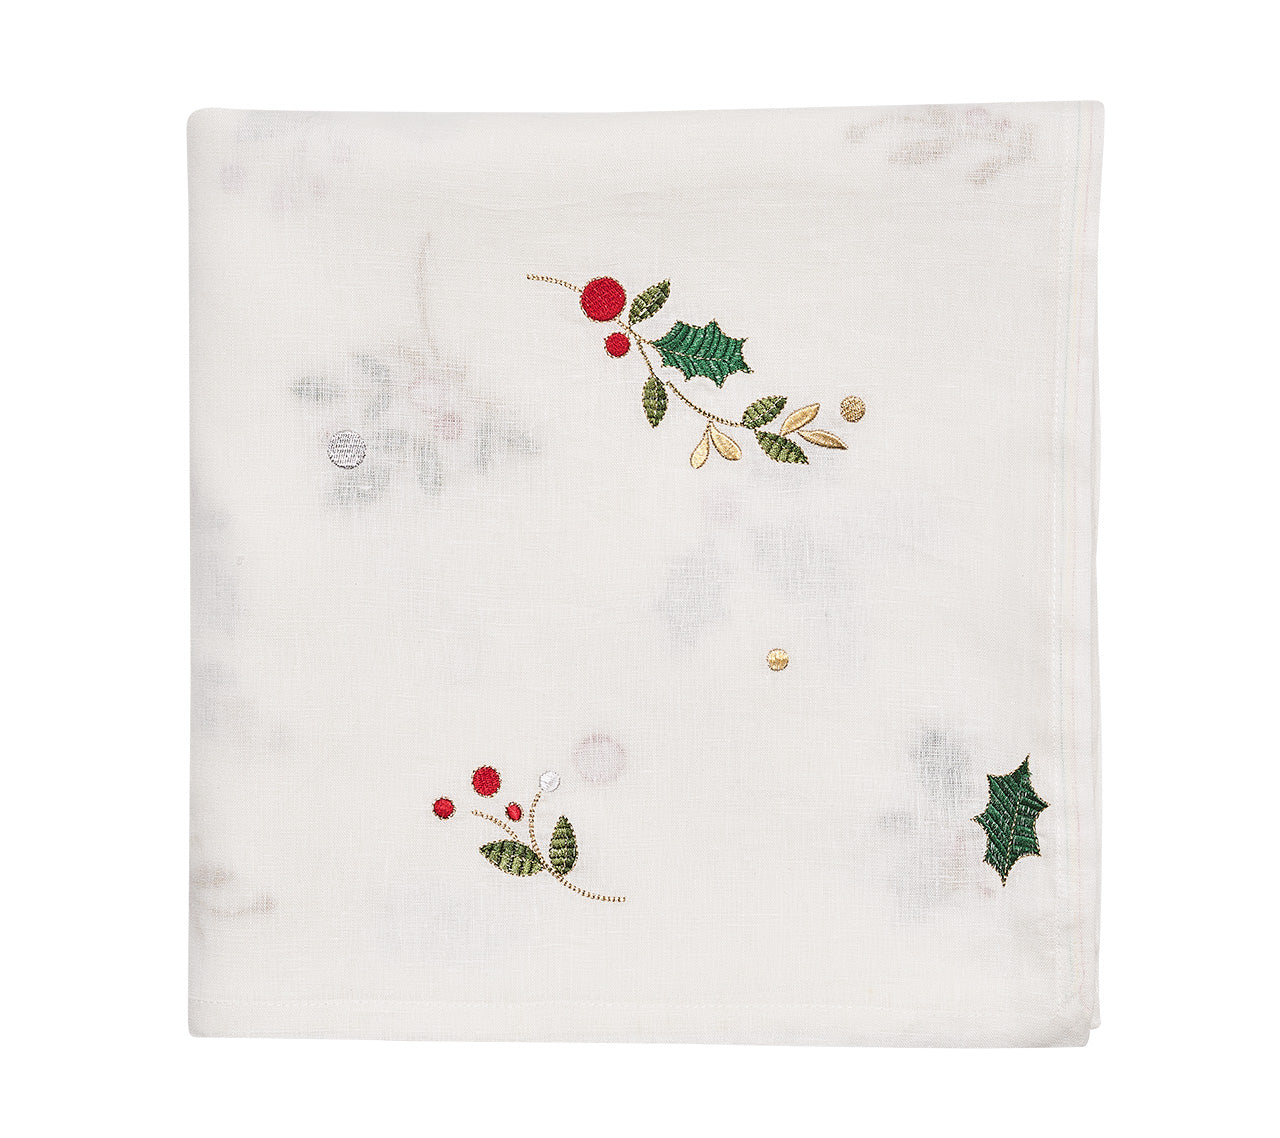 Kim Seybert Luxury Holly Tablecloth in White, Red & Green